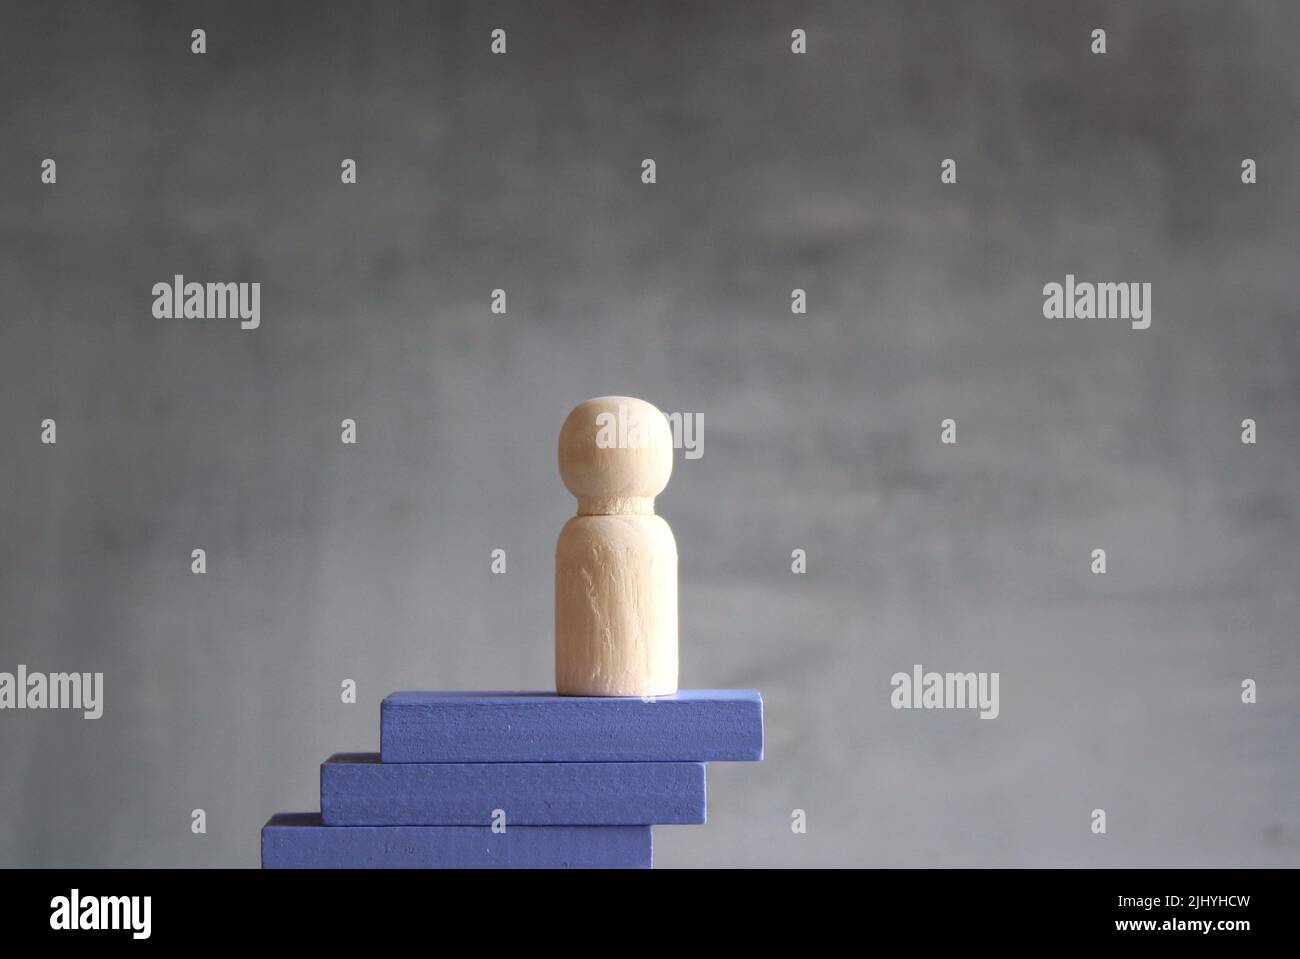 Wooden doll on top of wooden stairs. Concept of business success, social or career ladder. Stock Photo